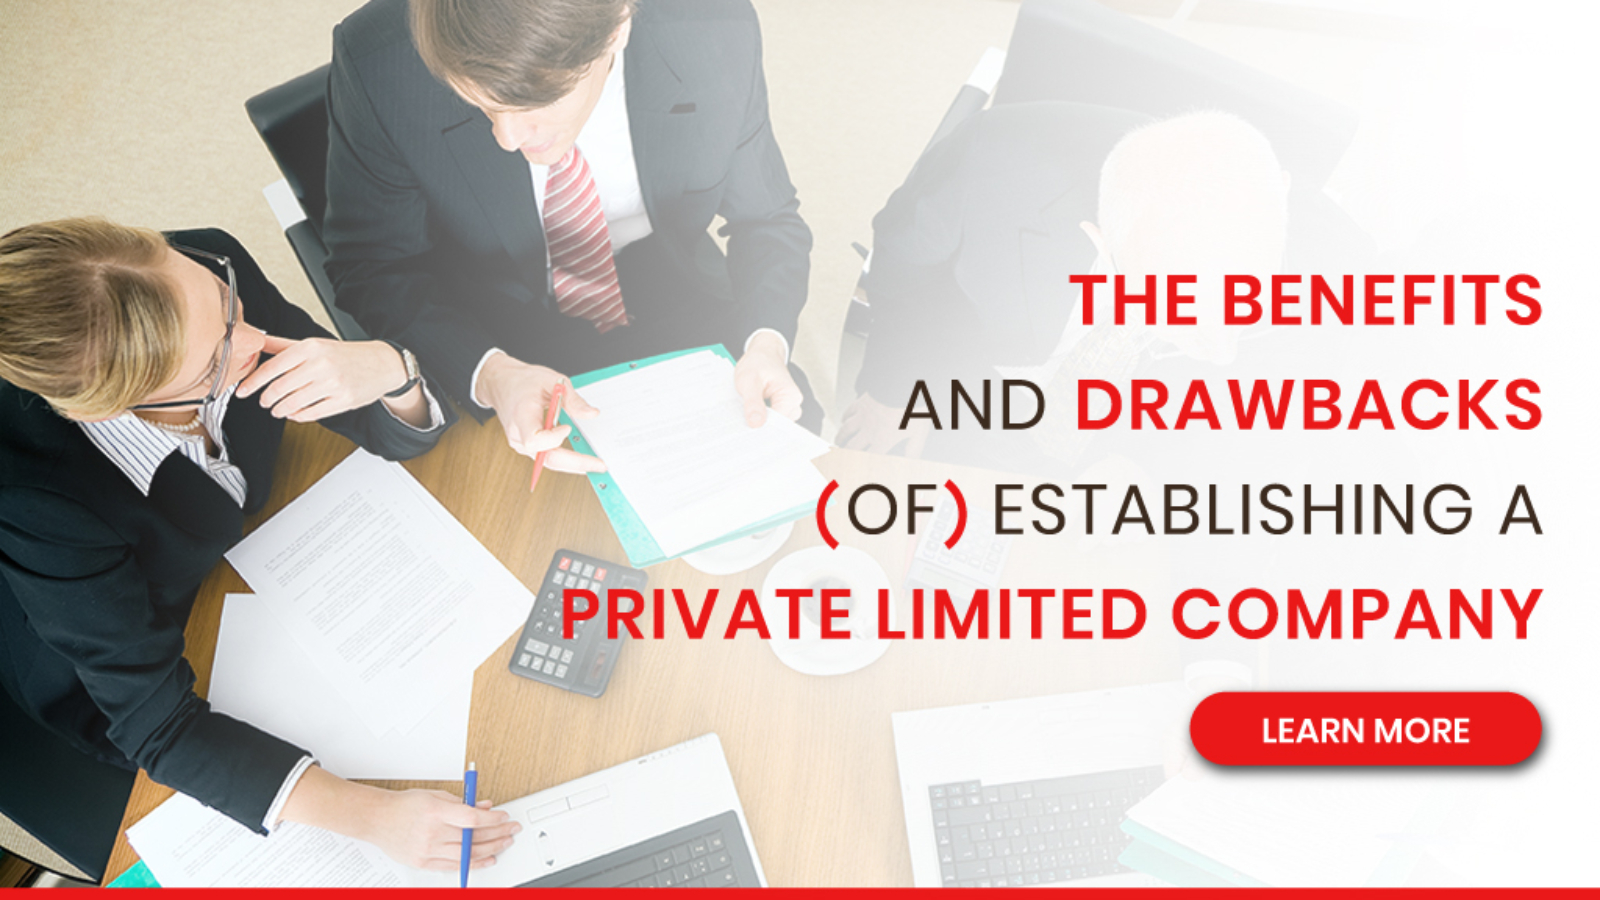 The Benefits & Drawbacks of Establishing a Private Limited Company